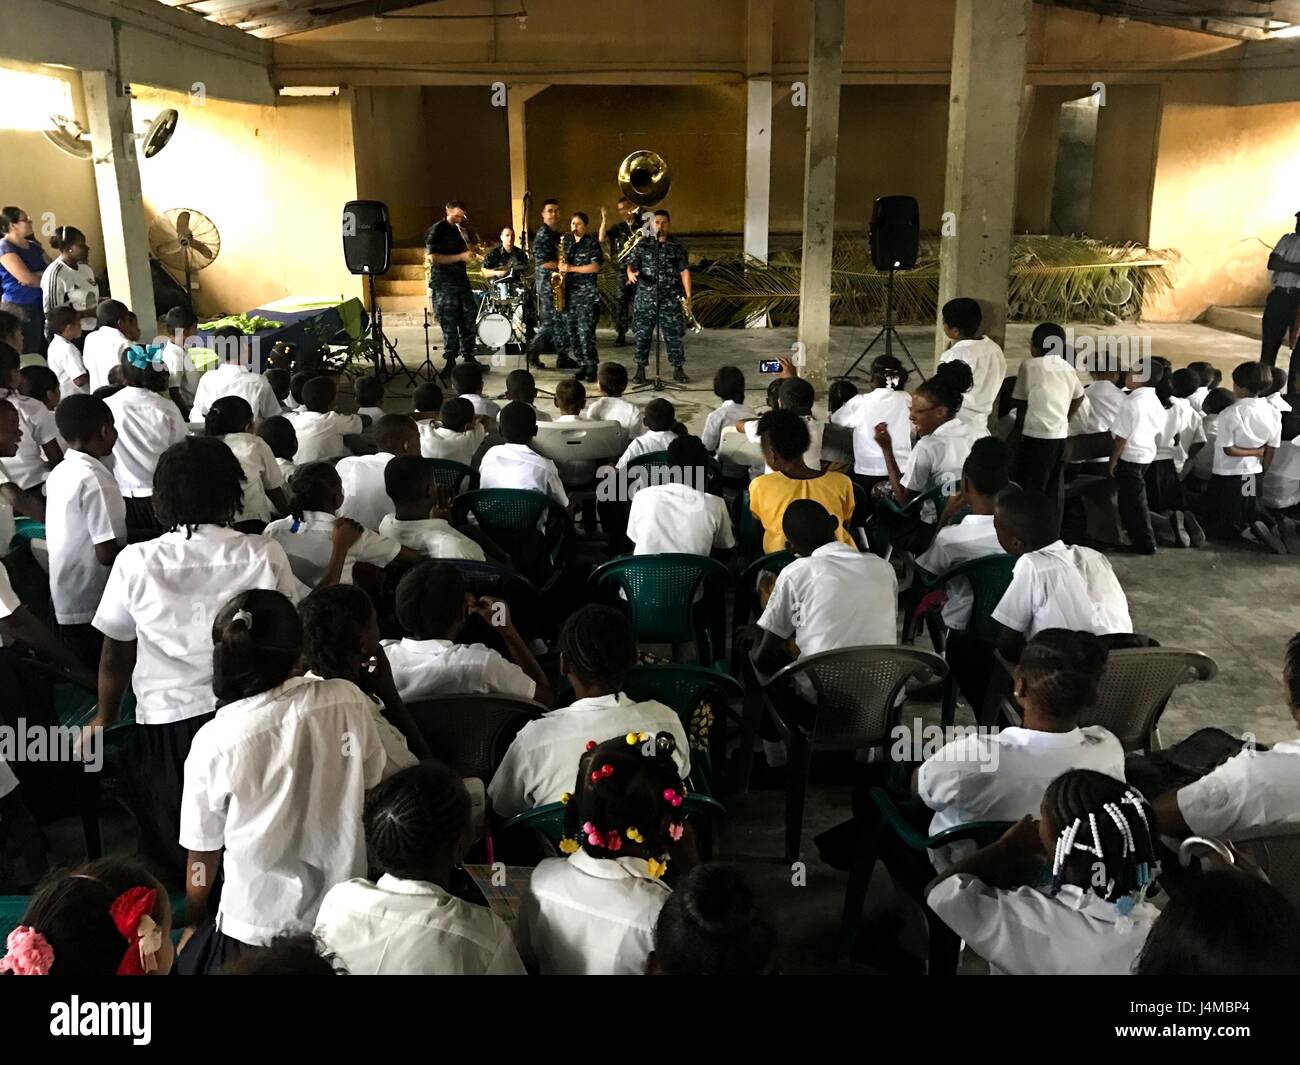 170222-N-YL073-005 SANTA FE, Honduras (Feb. 22, 2017) – Members of the U.S. Fleet Forces (USFF) Band, Norfolk, Va., perform for host nation school children in support of Continuing Promise 2017’s (CP-17) visit to Trujillo, Honduras. CP-17 is a U.S. Southern Command-sponsored and U.S. Naval Forces Southern Command/U.S. 4th Fleet-conducted deployment to conduct civil-military operations including humanitarian assistance, training engagements, and medical, dental, and veterinary support in an effort to show U.S. support and commitment to Central and South America. (U.S. Navy photo by Mass Communi Stock Photo